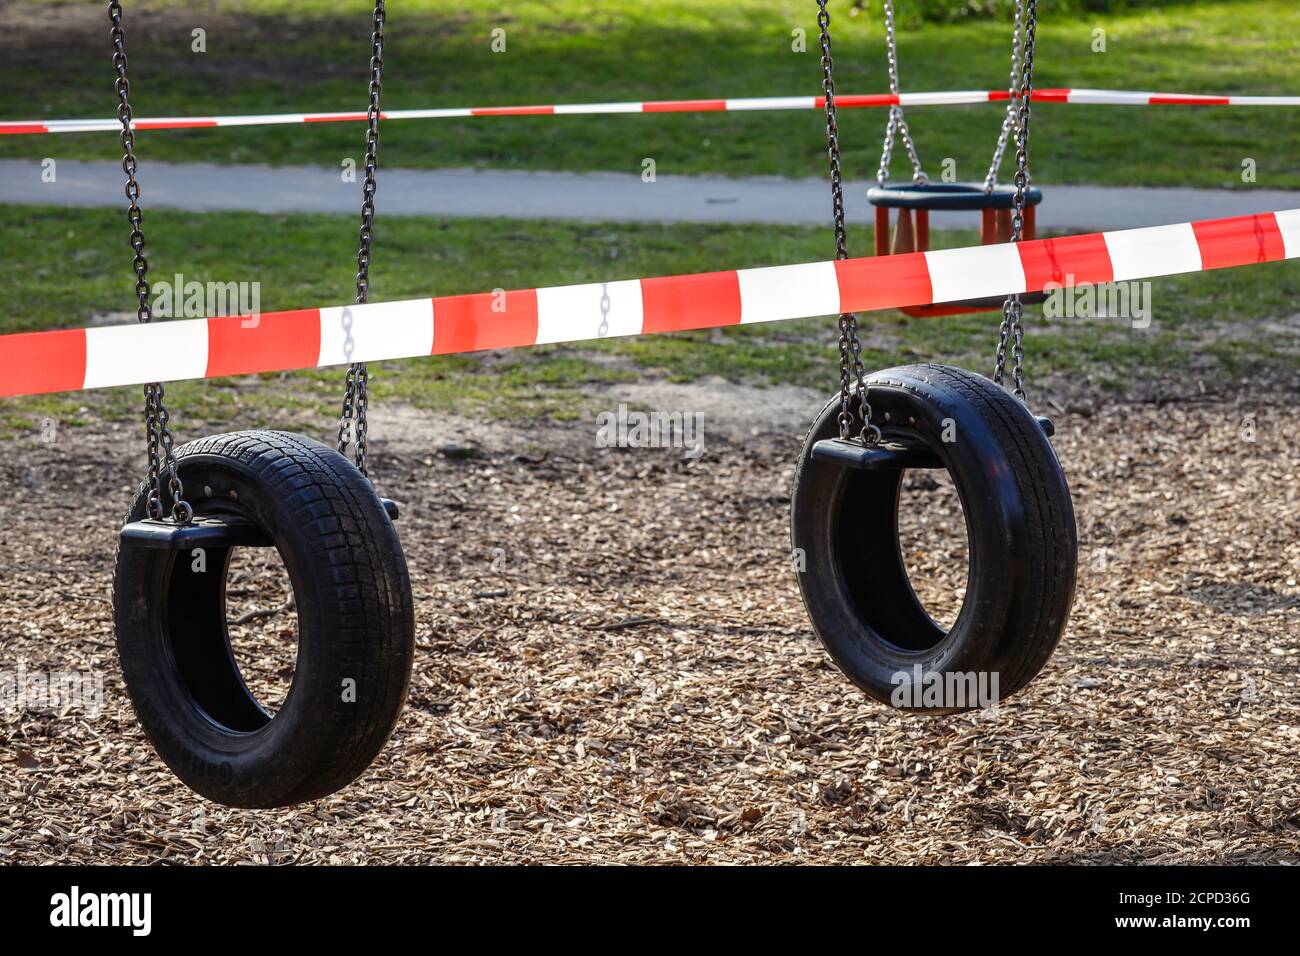 Children's playground in the city garden closed due to corona pandemic ban on contact, Essen, Ruhr area, North Rhine-Westphalia, Germany Stock Photo